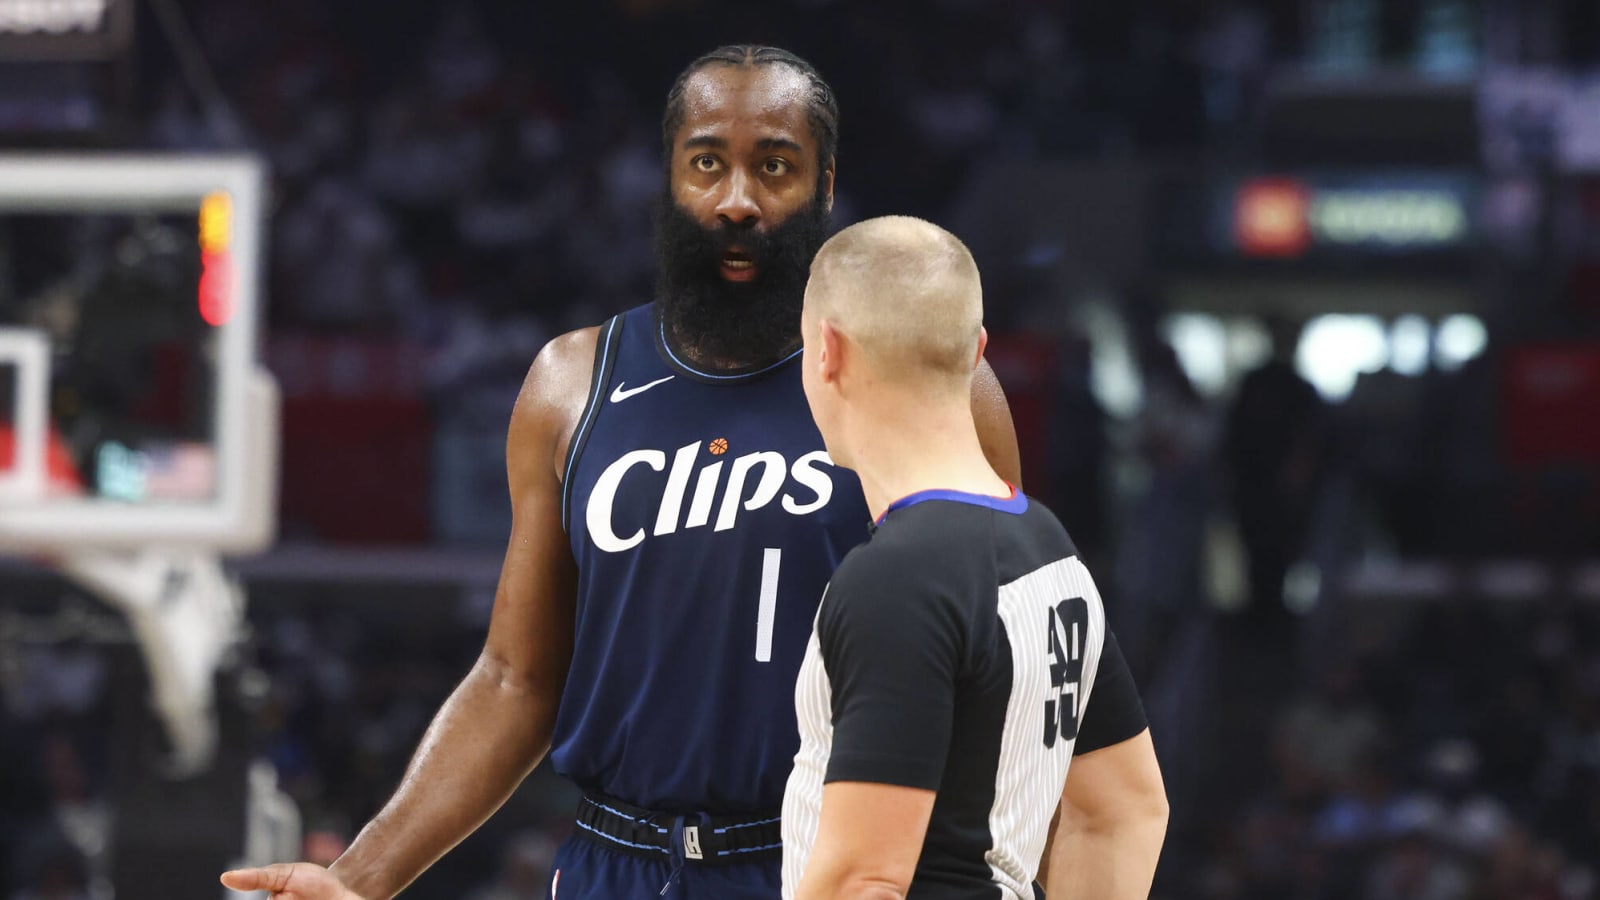 Clippers Still Winless With James Harden, Fall to Wounded Grizzlies